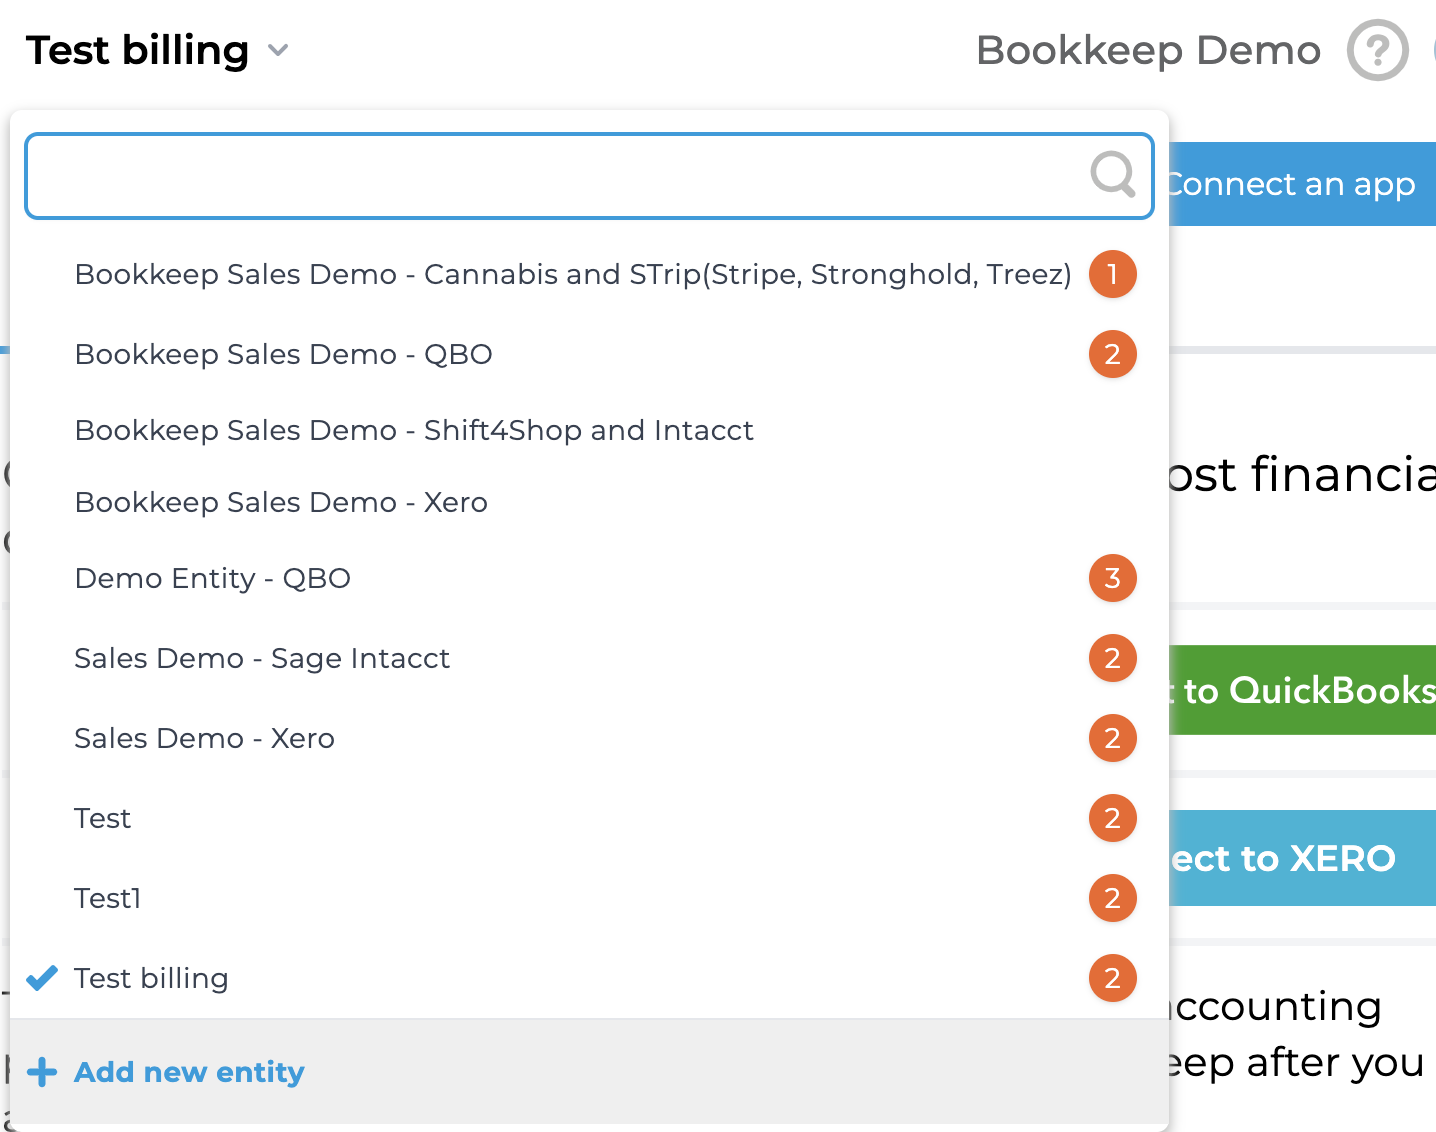 Bookkeep interface showing &quot;Bookkeep Demo&quot; with multiple entities